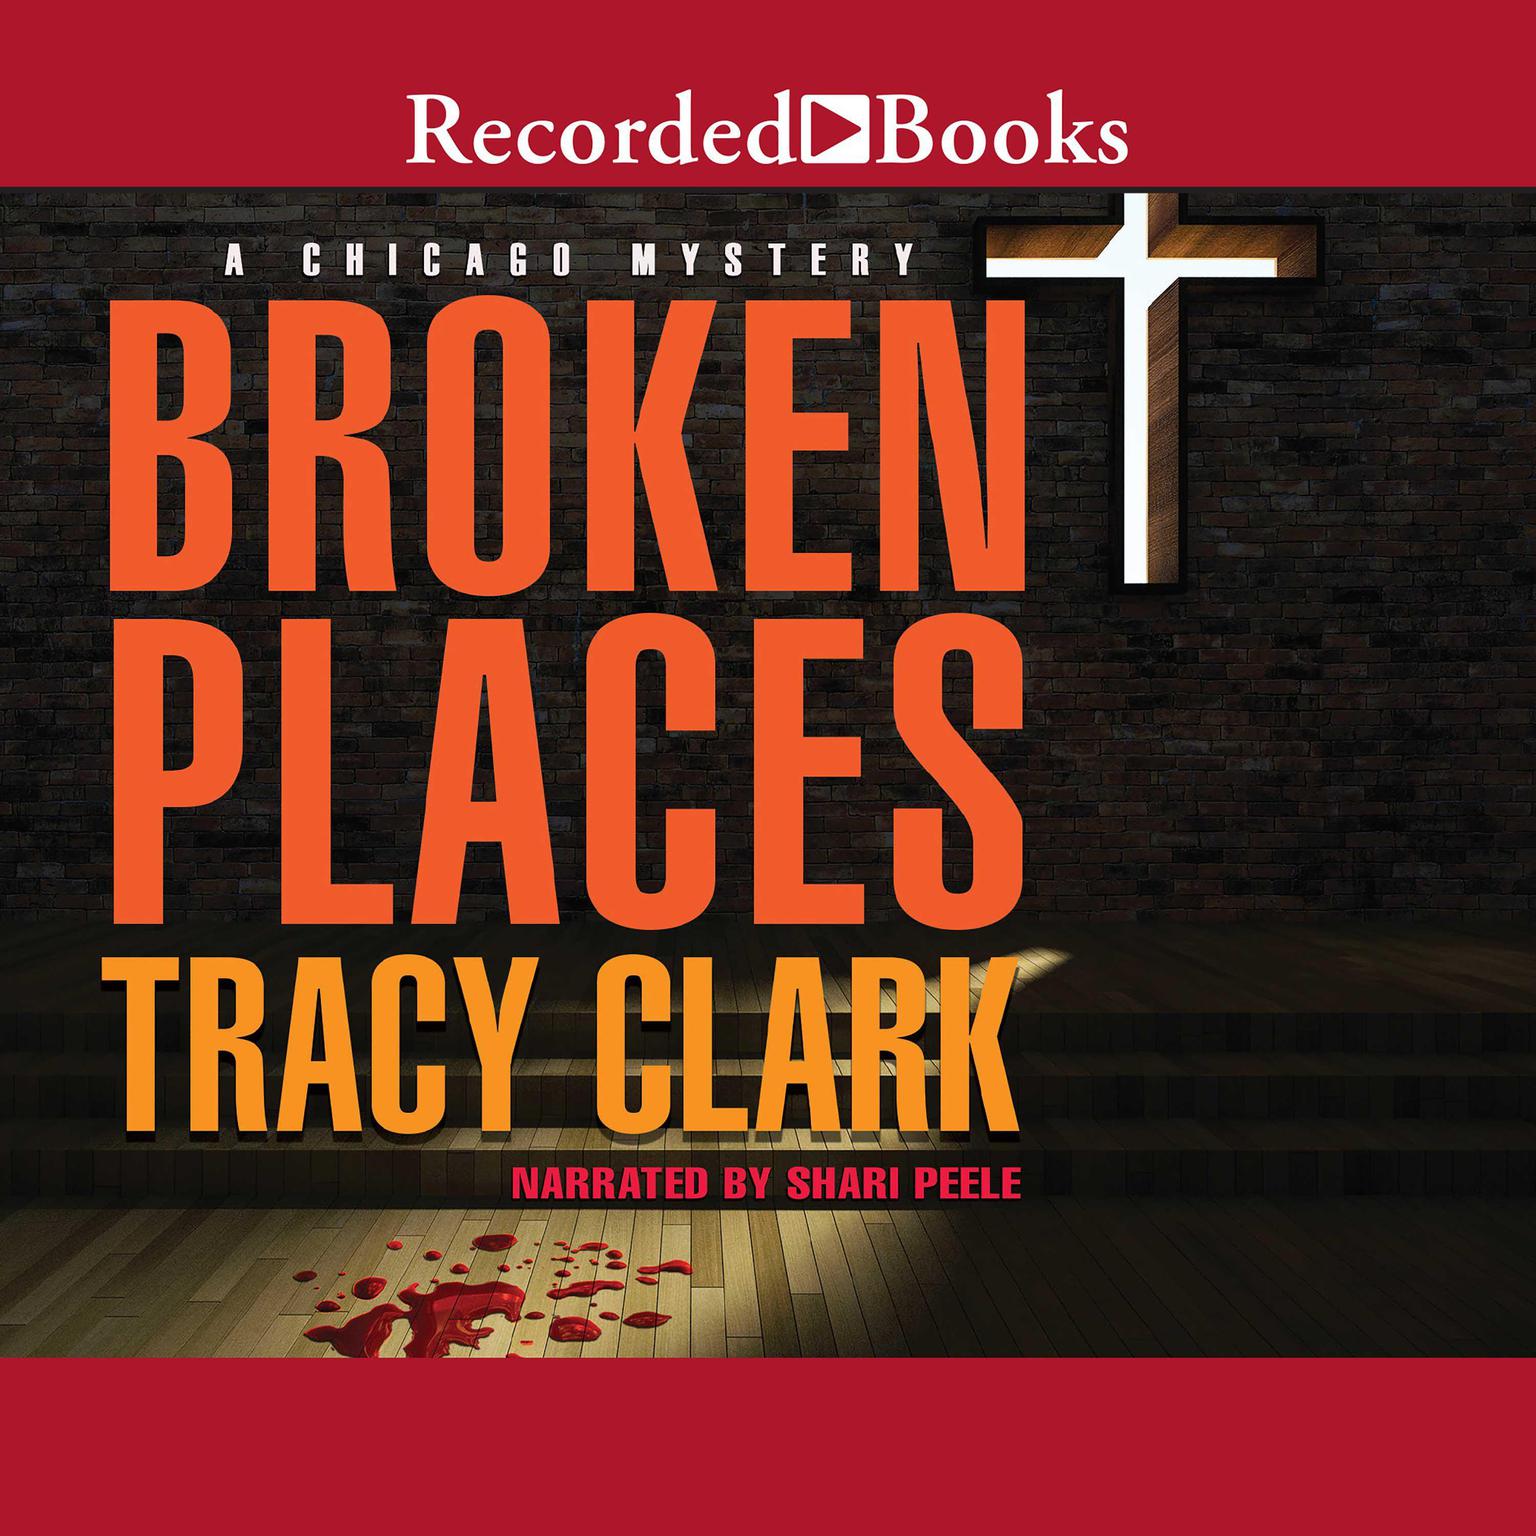 Broken Places Audiobook, by Tracy Clark